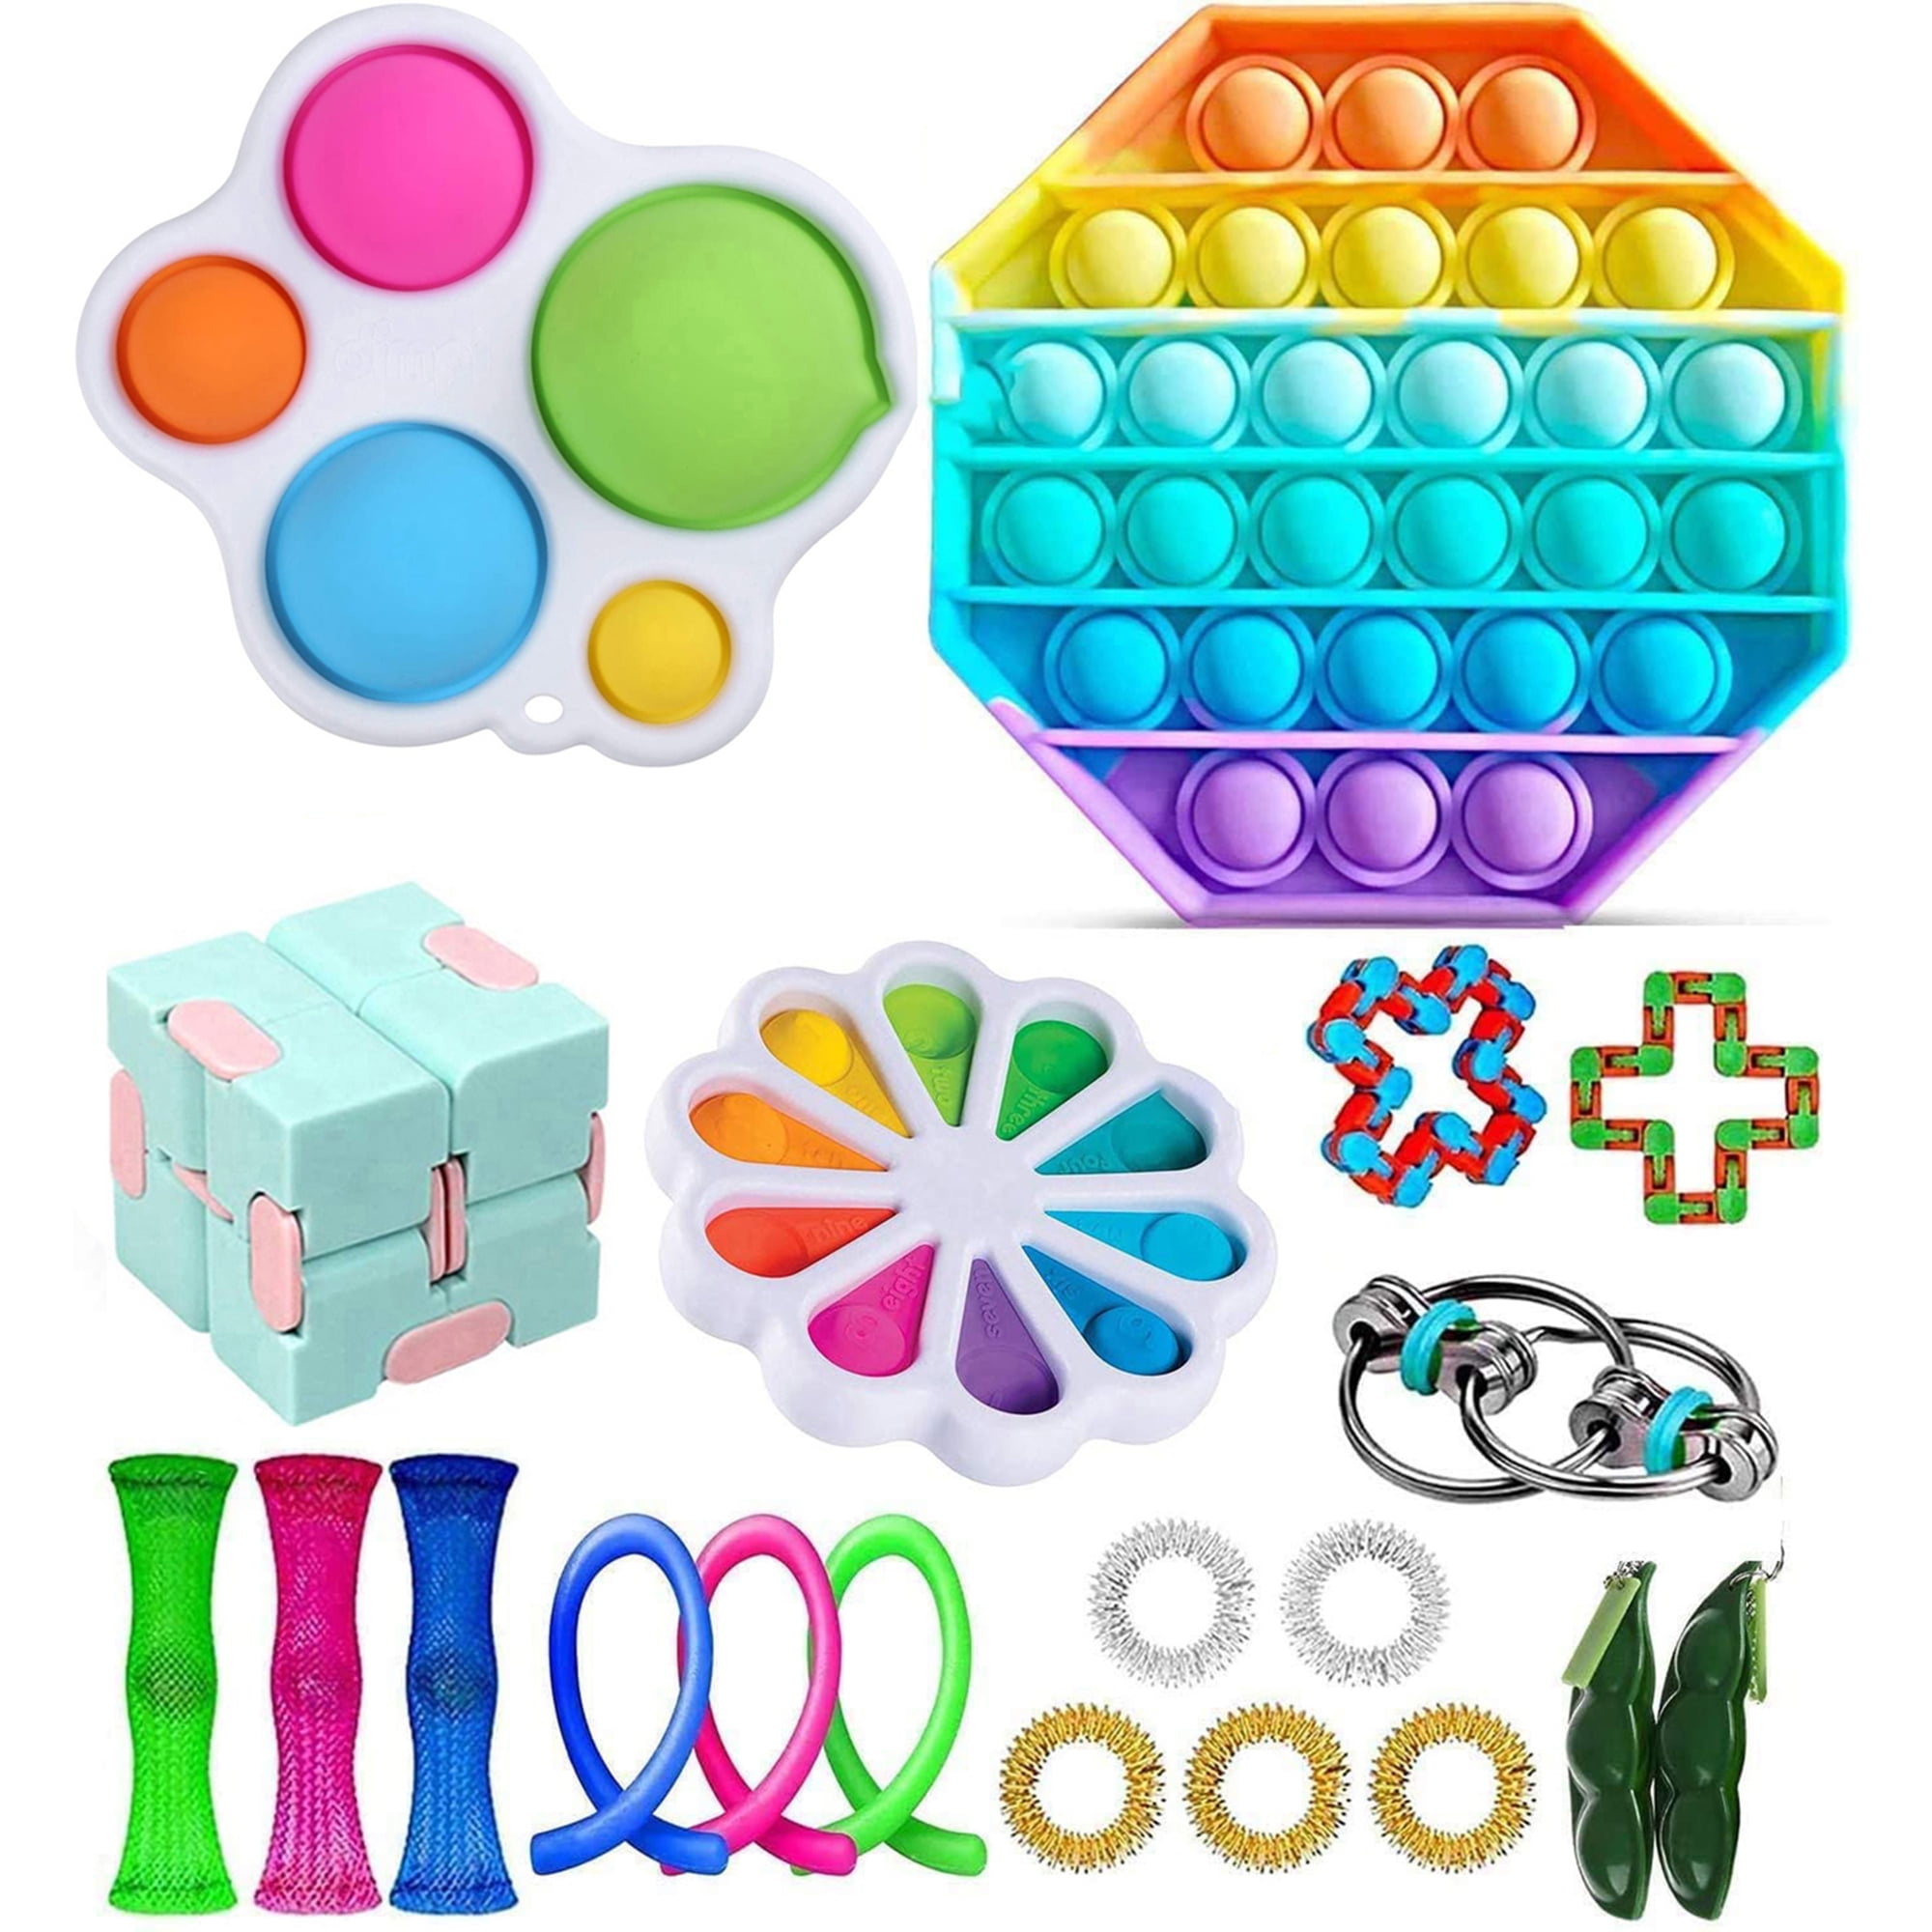 Details about   Mesh Marble Anxiety Stress Relief Toys Fidget Toys Adults Kids Soothing Sensory 